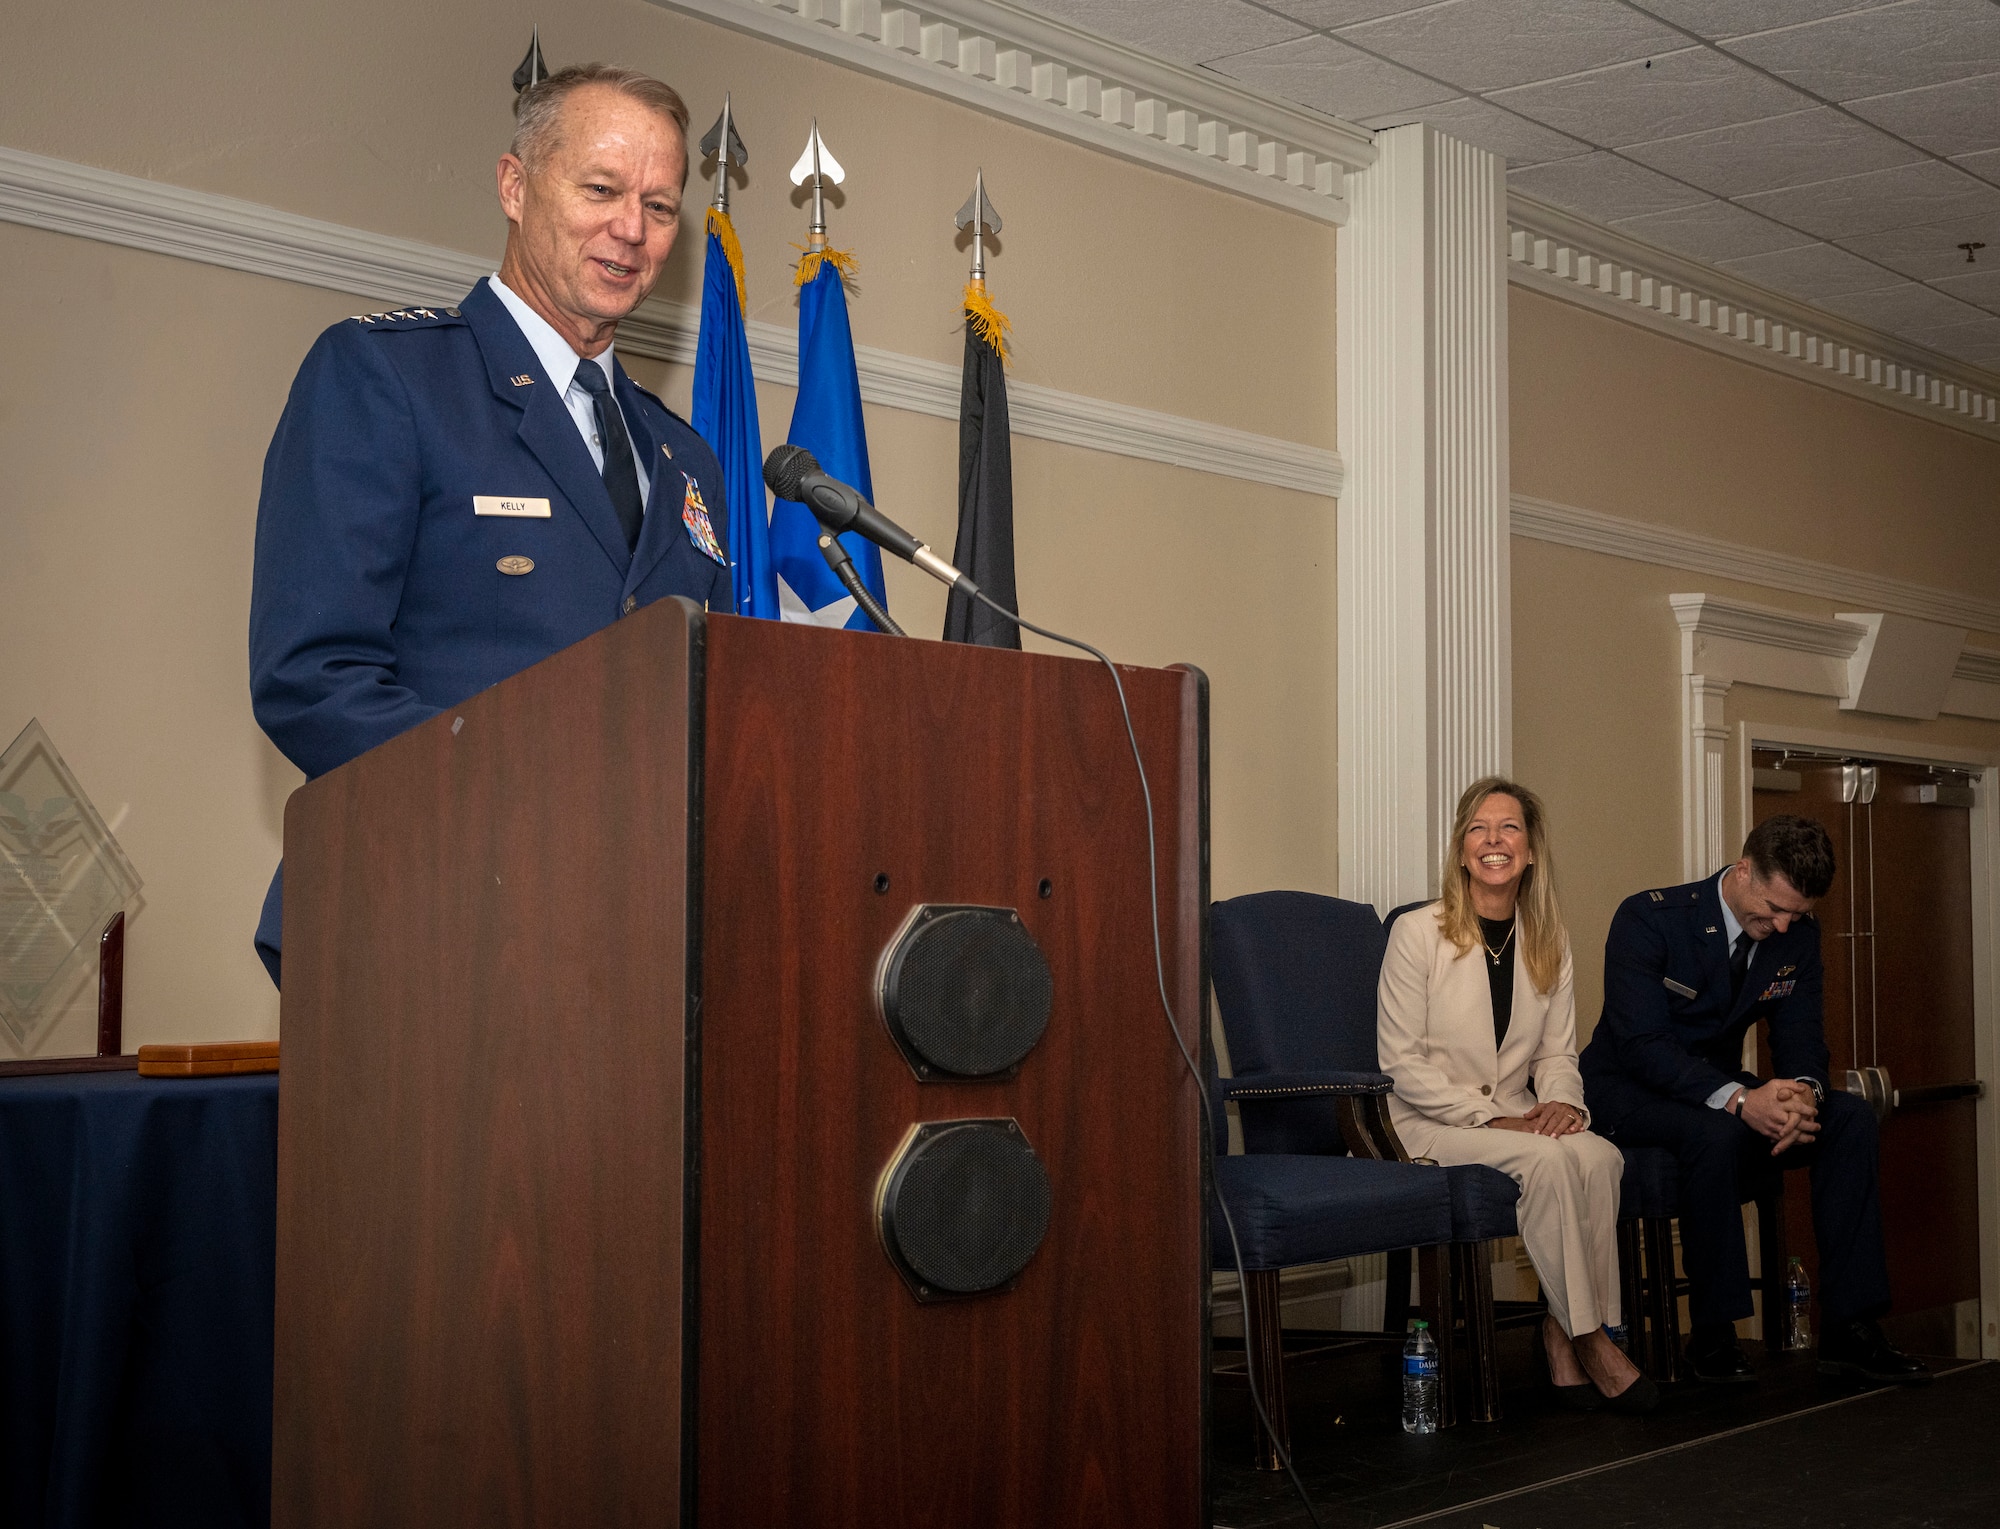 U.S. Air Force Gen. Mark Kelly, left, commander of Air Combat Command,  highlights the recipients accomplishments during a Lt. Col. Anthony C. Shine award ceremony at Seymour Johnson Air Force base, North Carolina, Dec. 15, 2023. In 1972, Shine went missing in action, his memory is honored through this award, which sets an example for Airmen today to uphold themselves to a higher standard of valor. (U.S. Air Force photo by Senior Airman Sabrina Fuller-Judd)